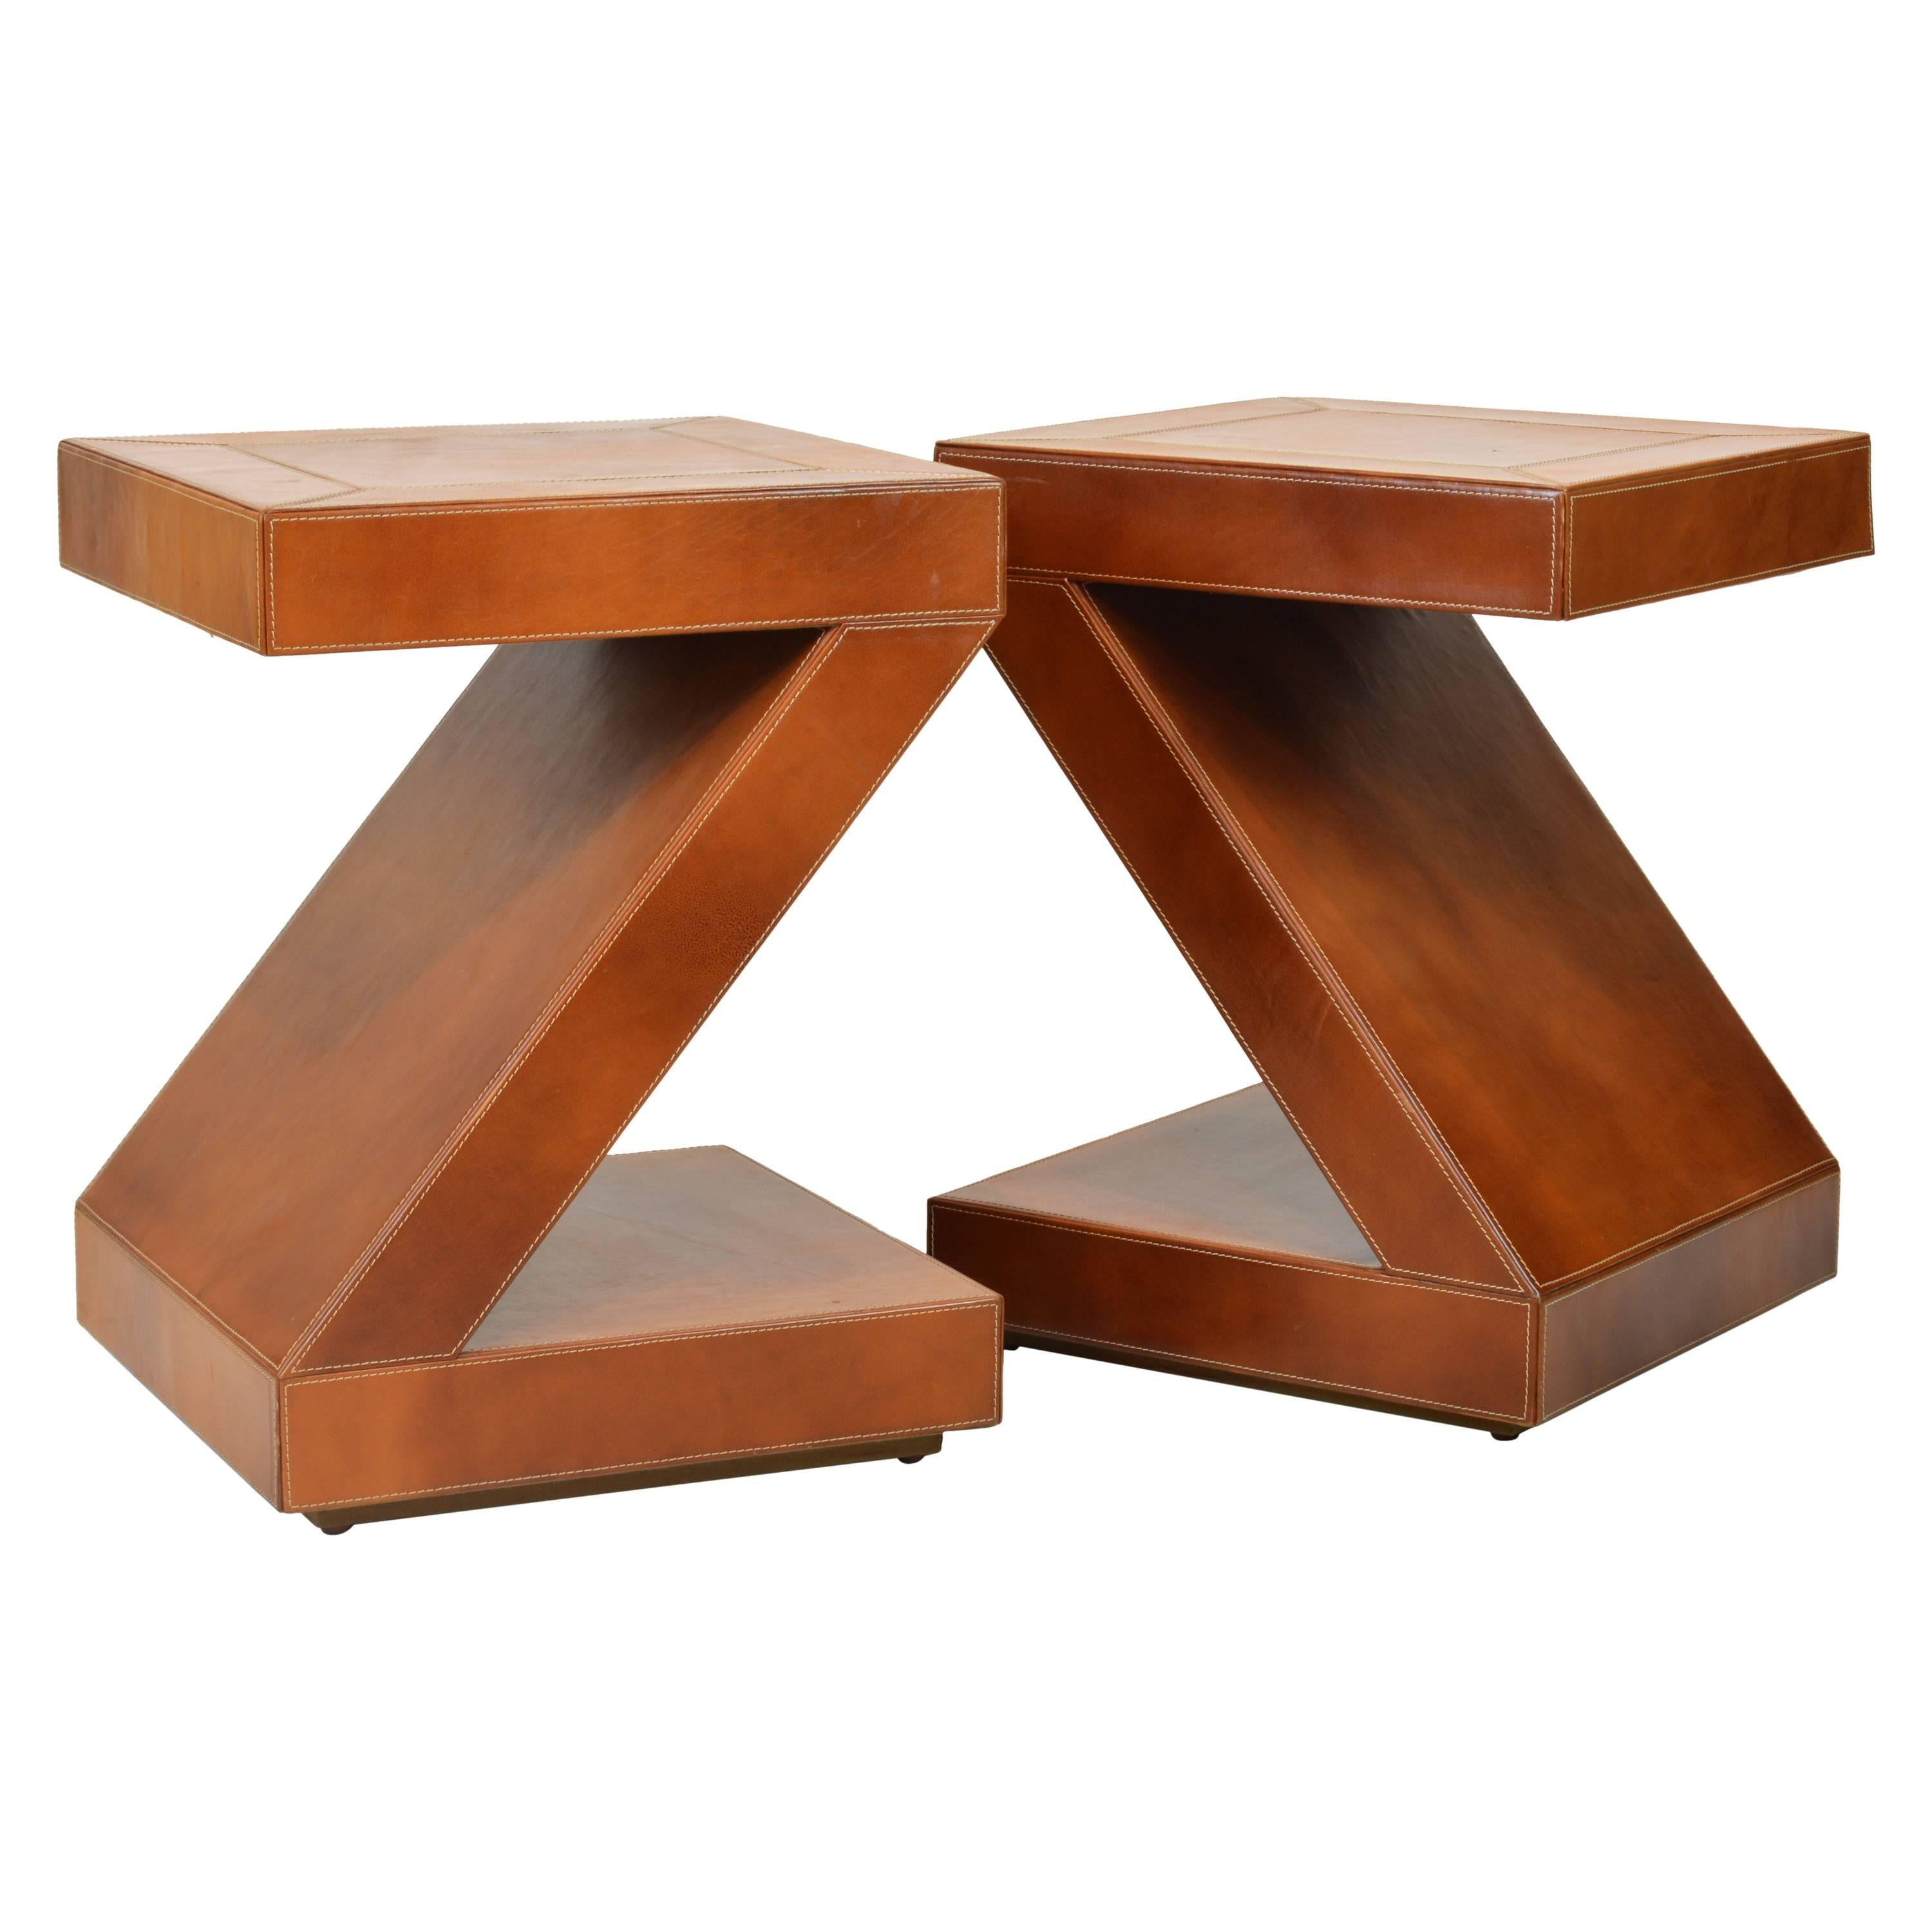 Pair of Vintage Sharp Modern Design Leather Clad Z-Themed Side or End Tables